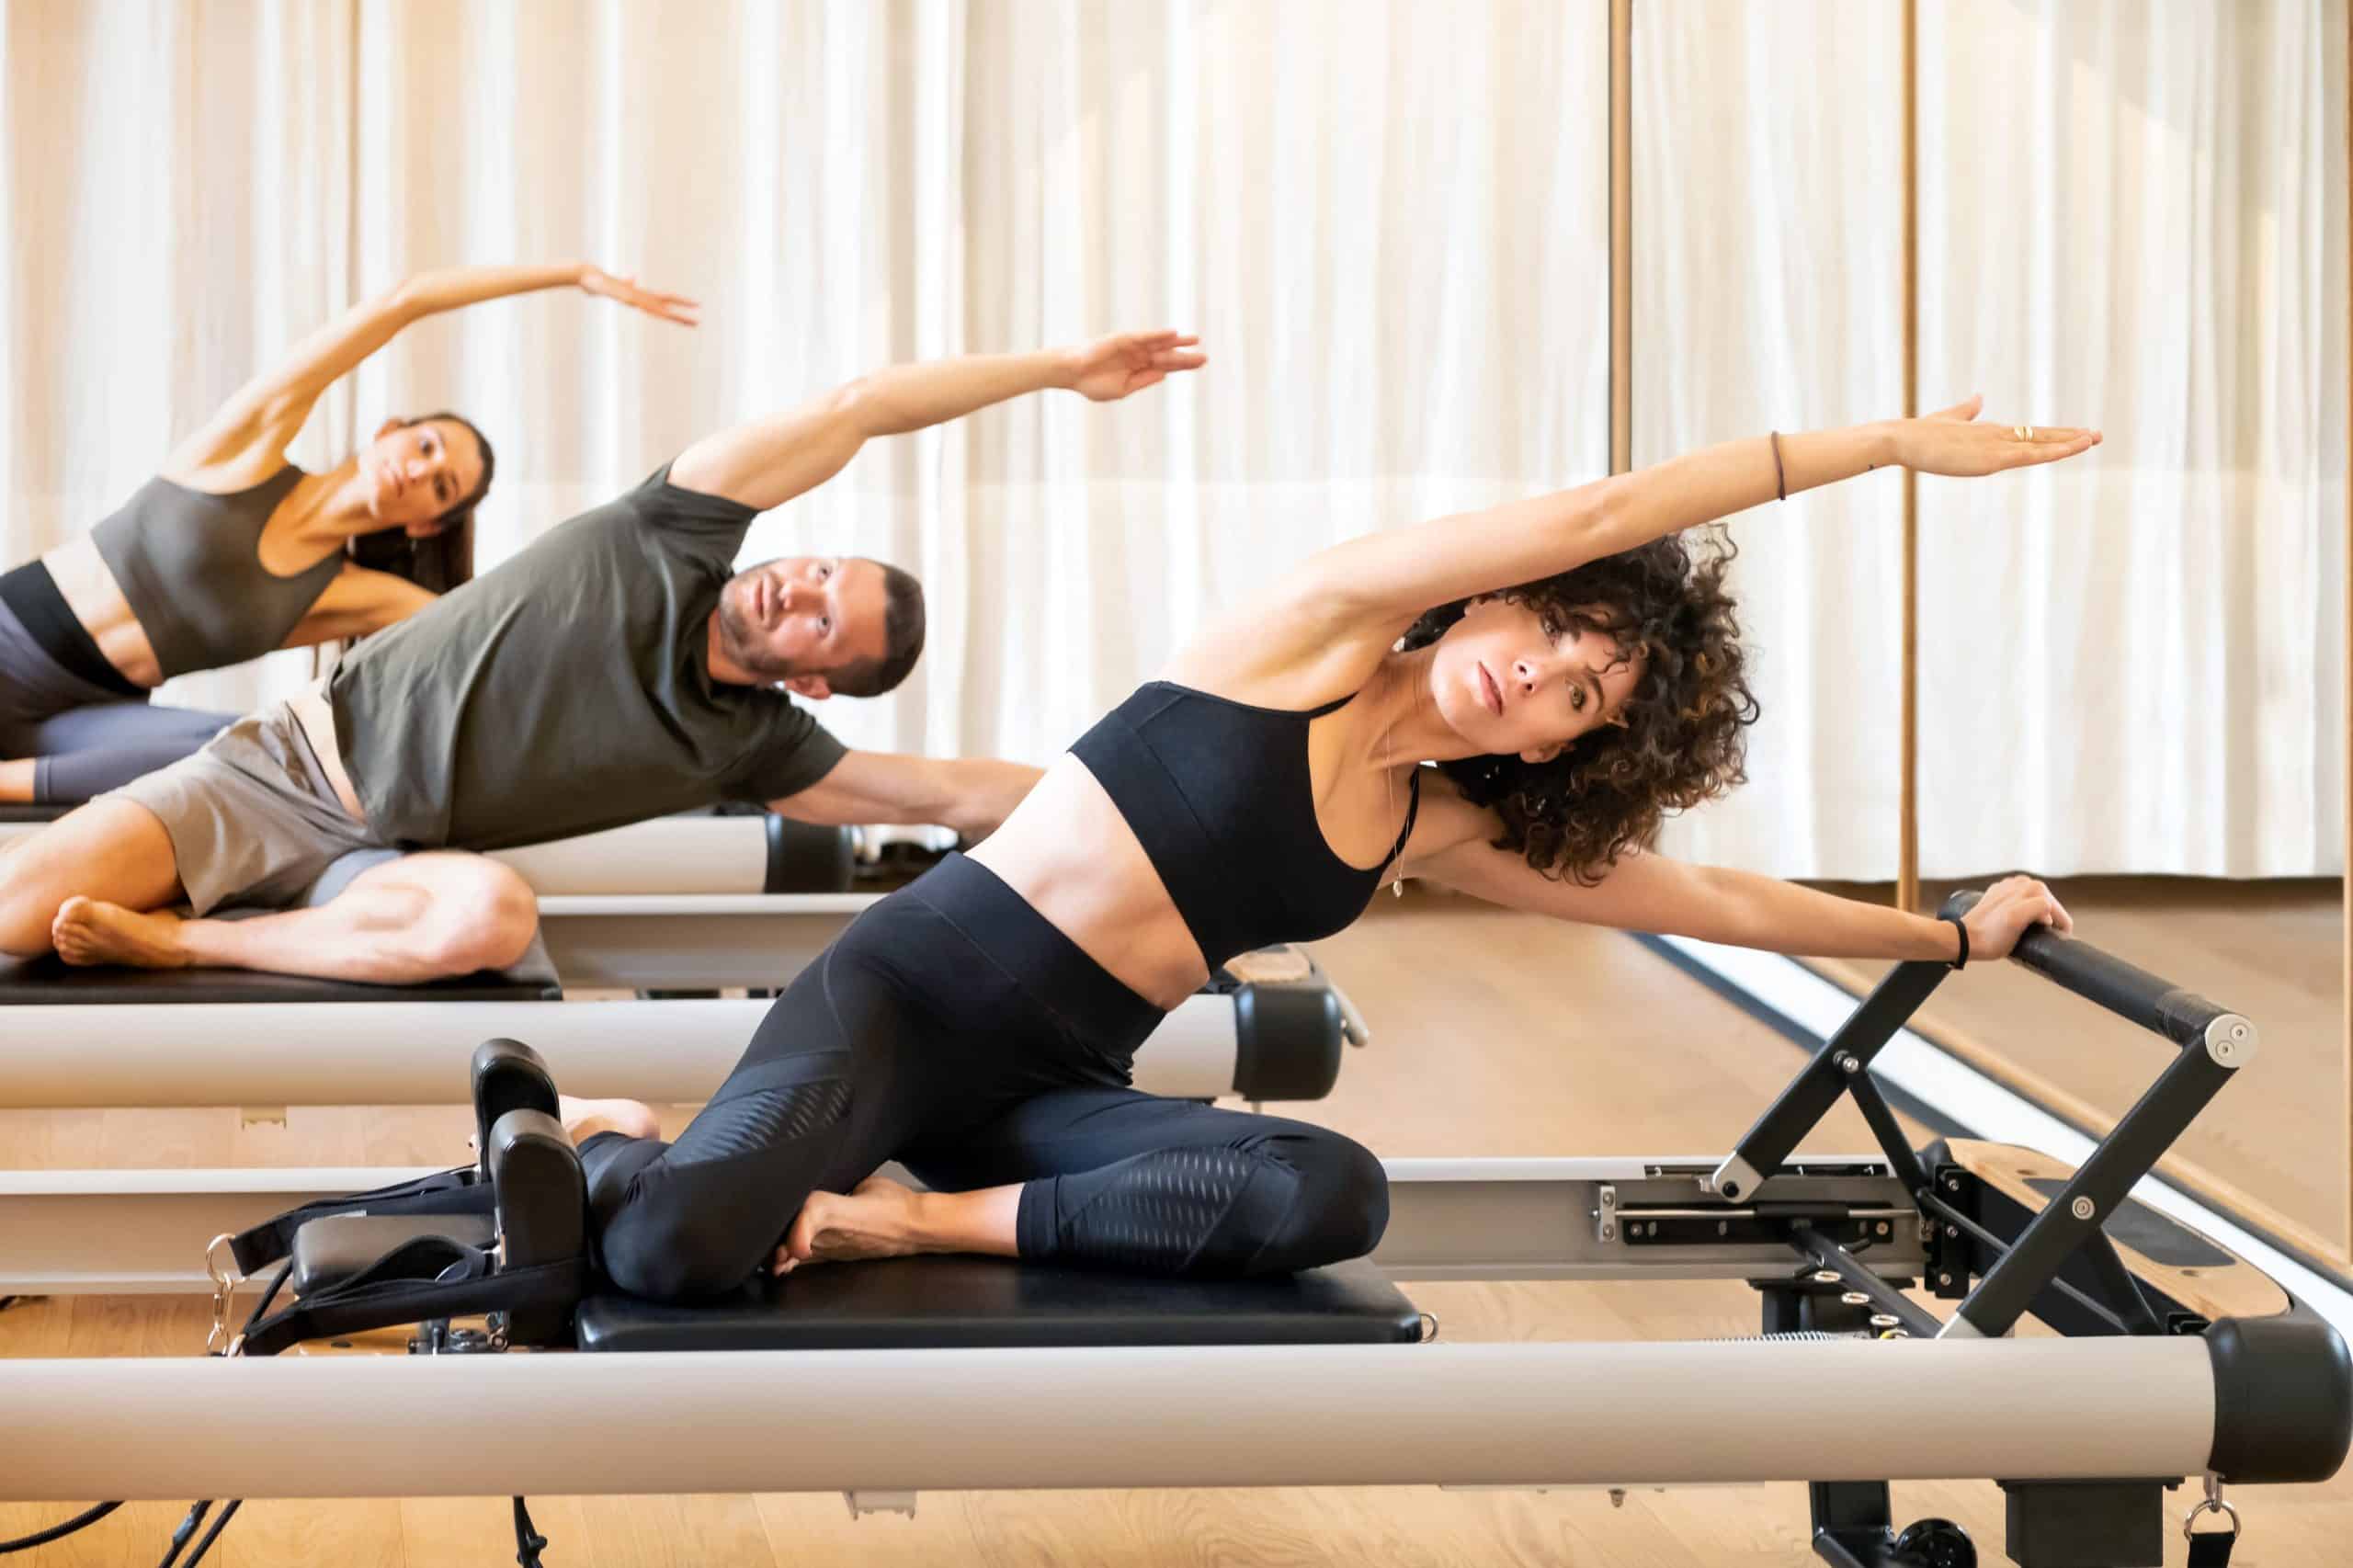 The Body Method — Barre Classes vs Pilates: What's the difference?